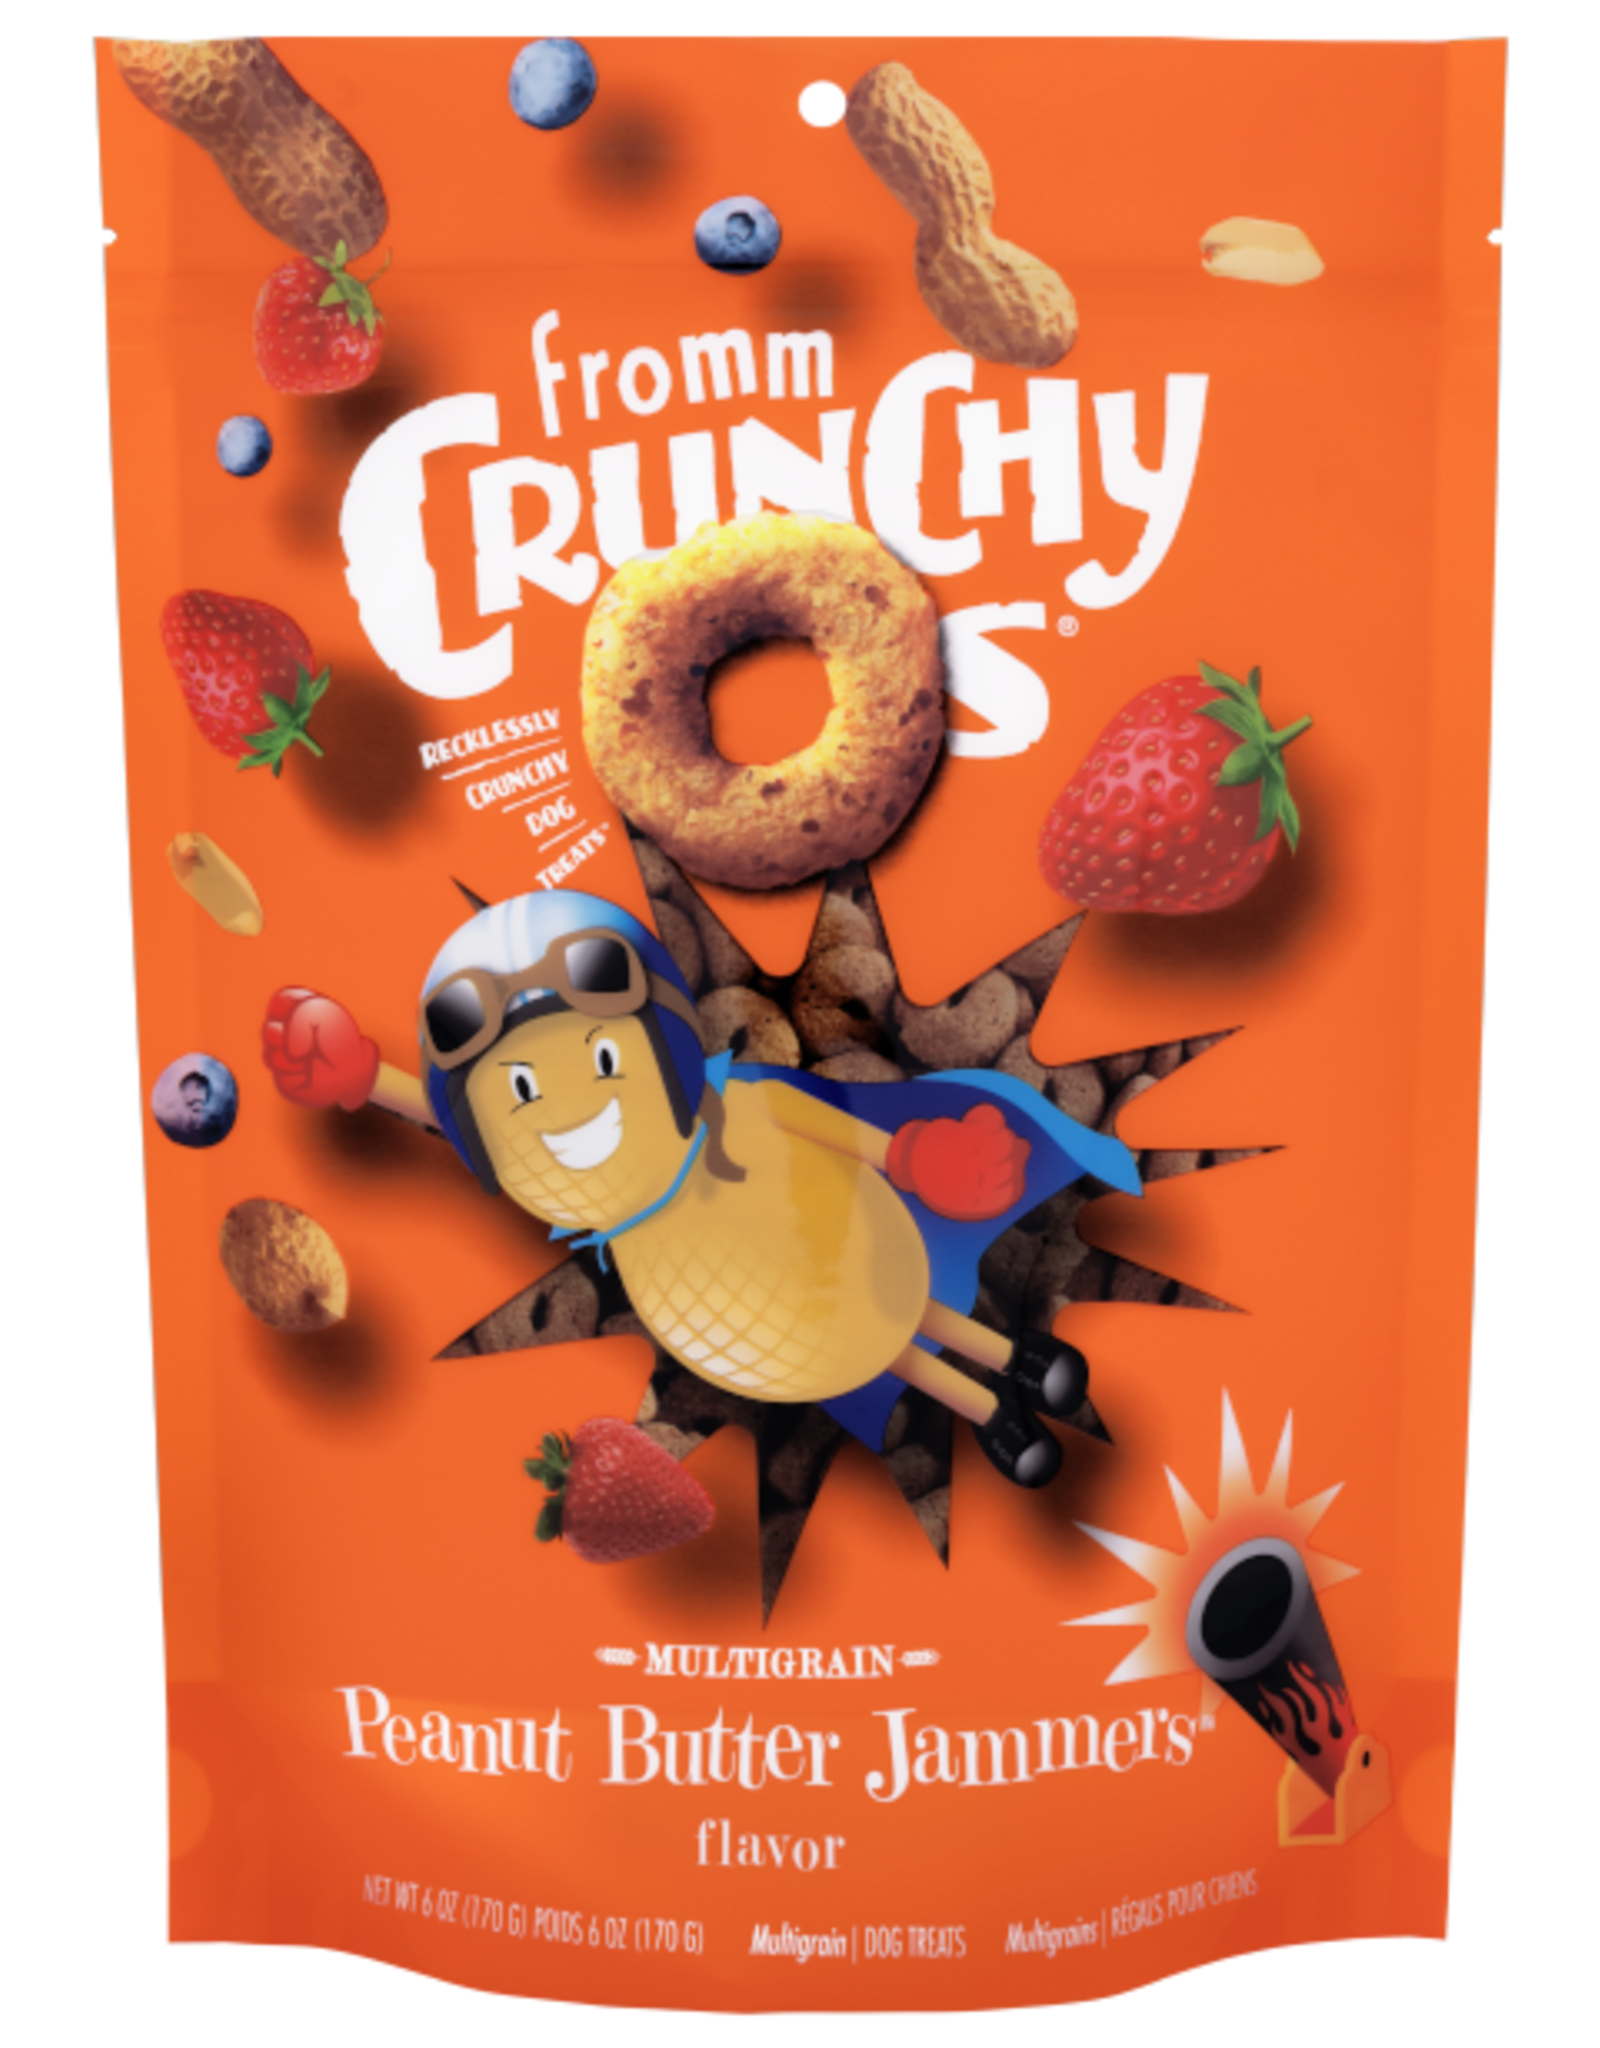 Fromm Crunchy O's PB Jammers 6oz